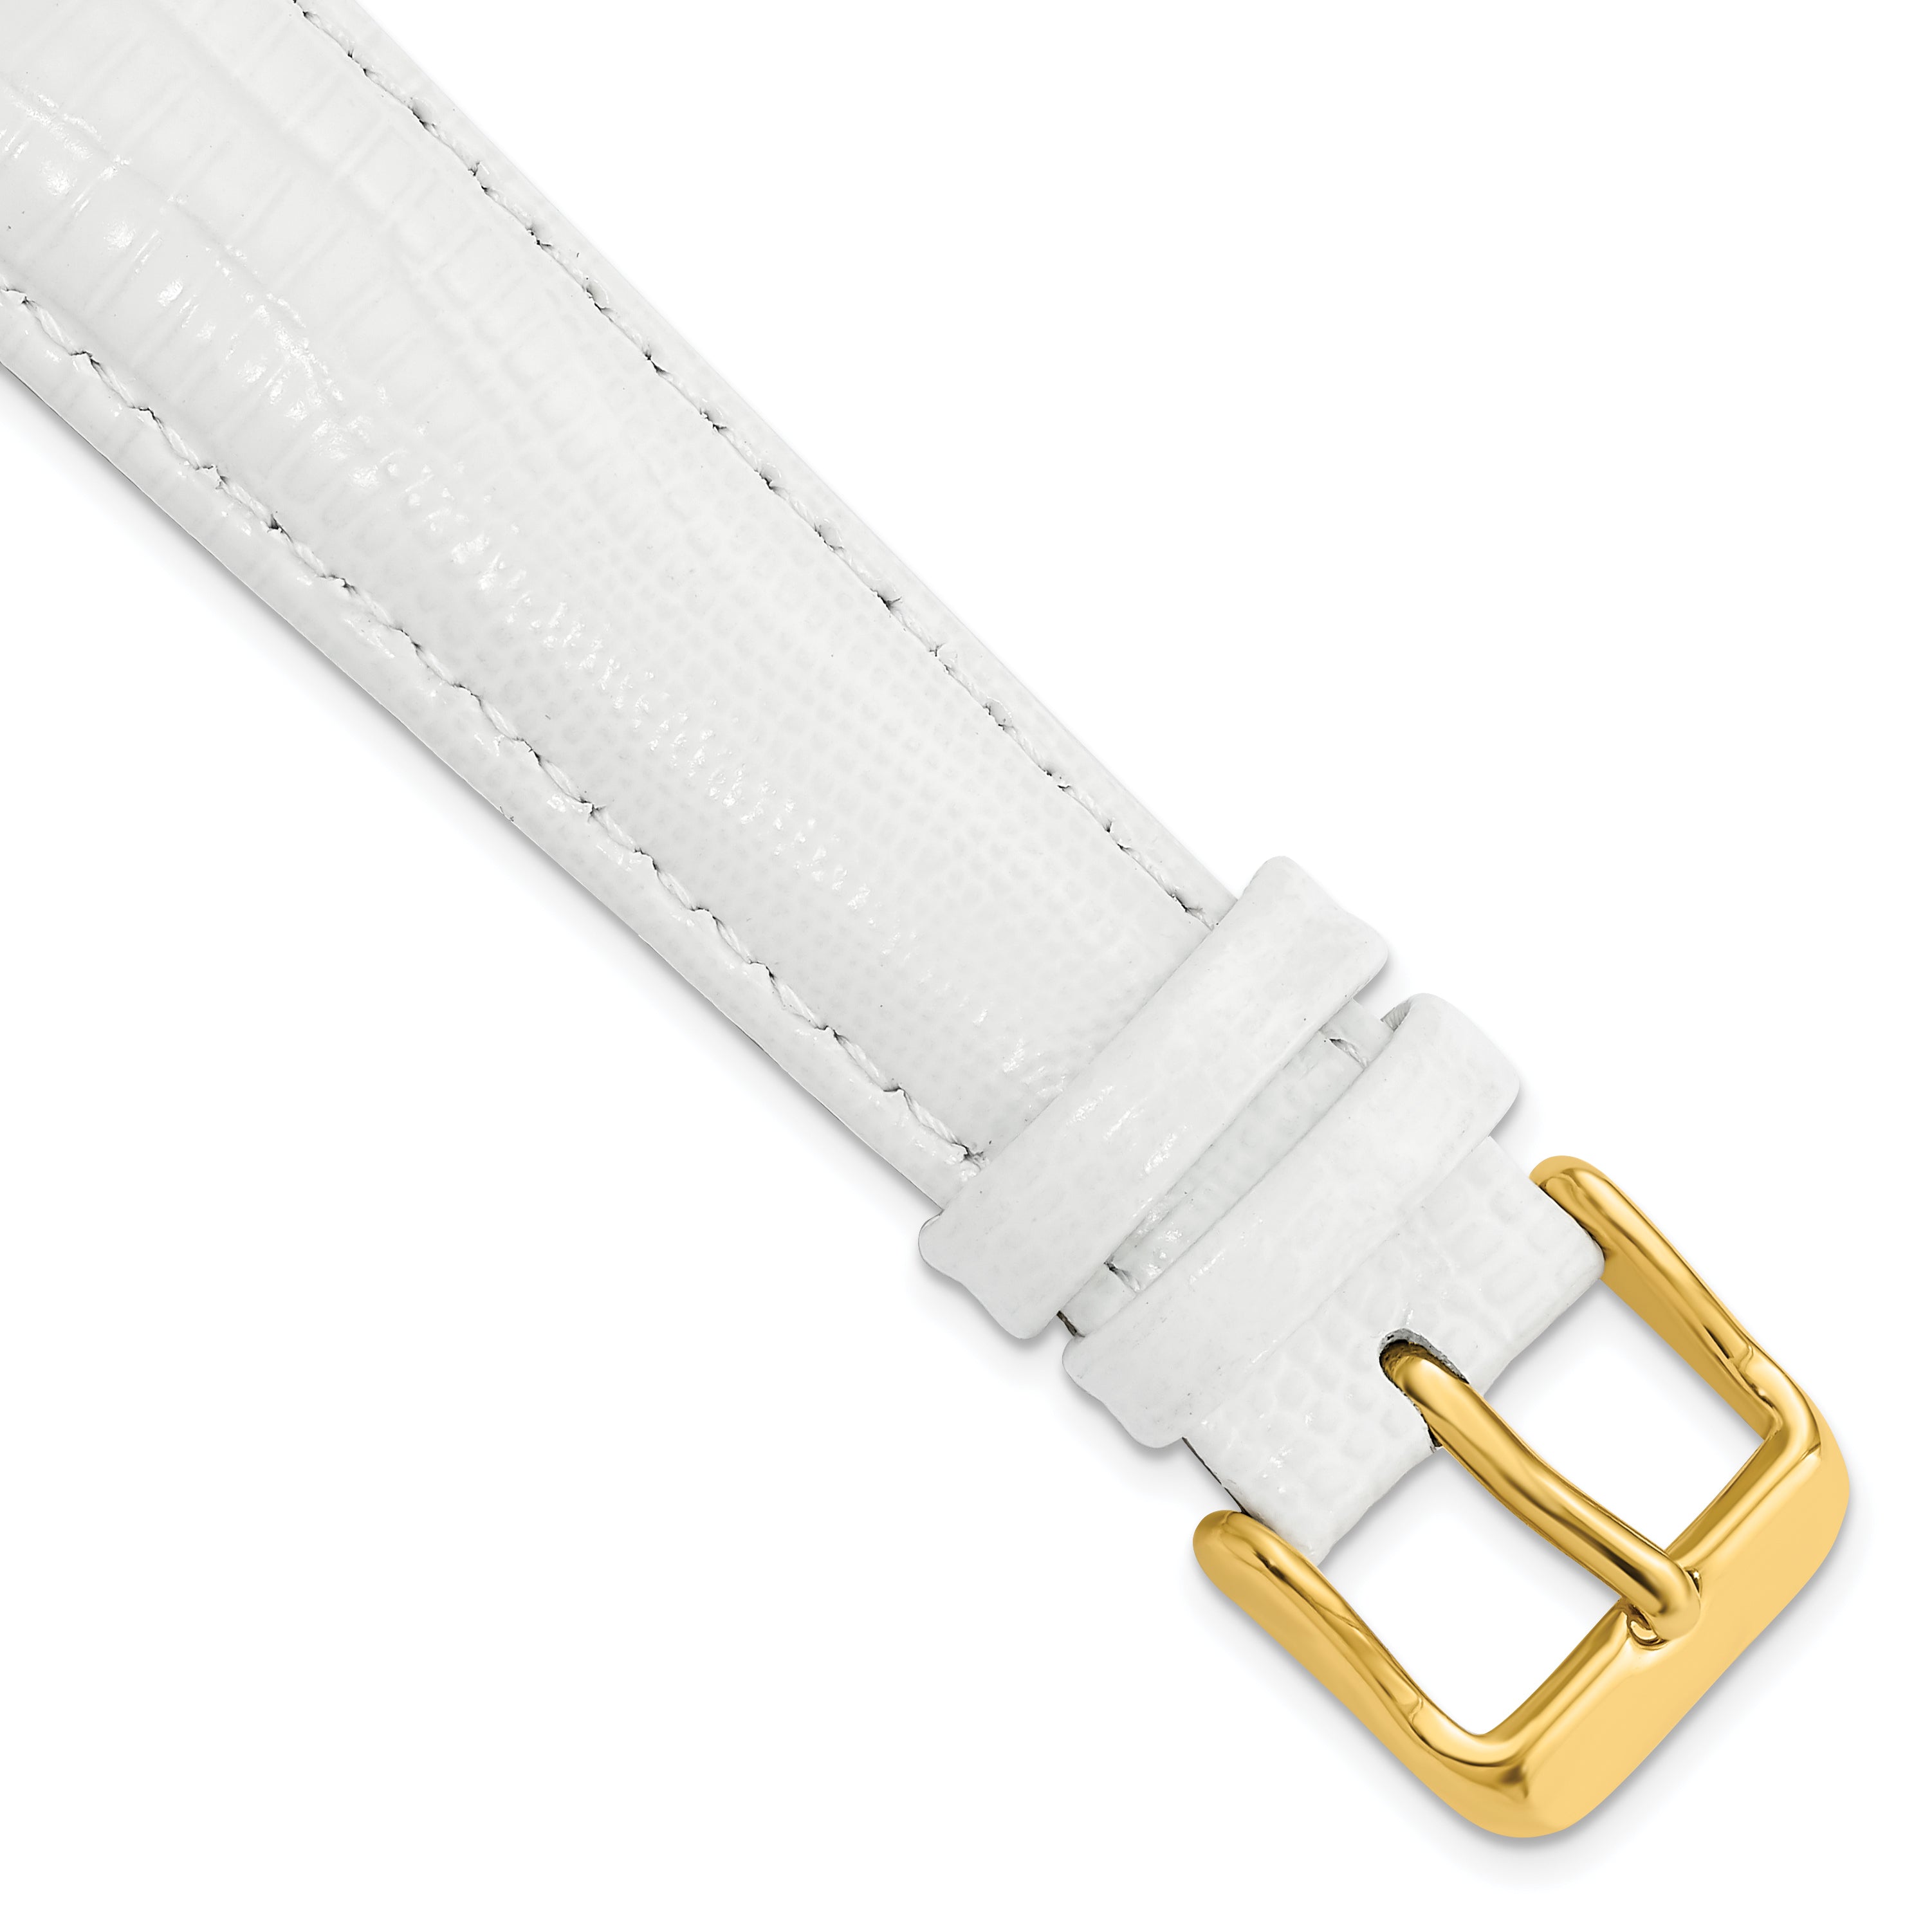 DeBeer 19mm White Teju Liz Grain Leather with Gold-tone Buckle 7.5 inch Watch Band